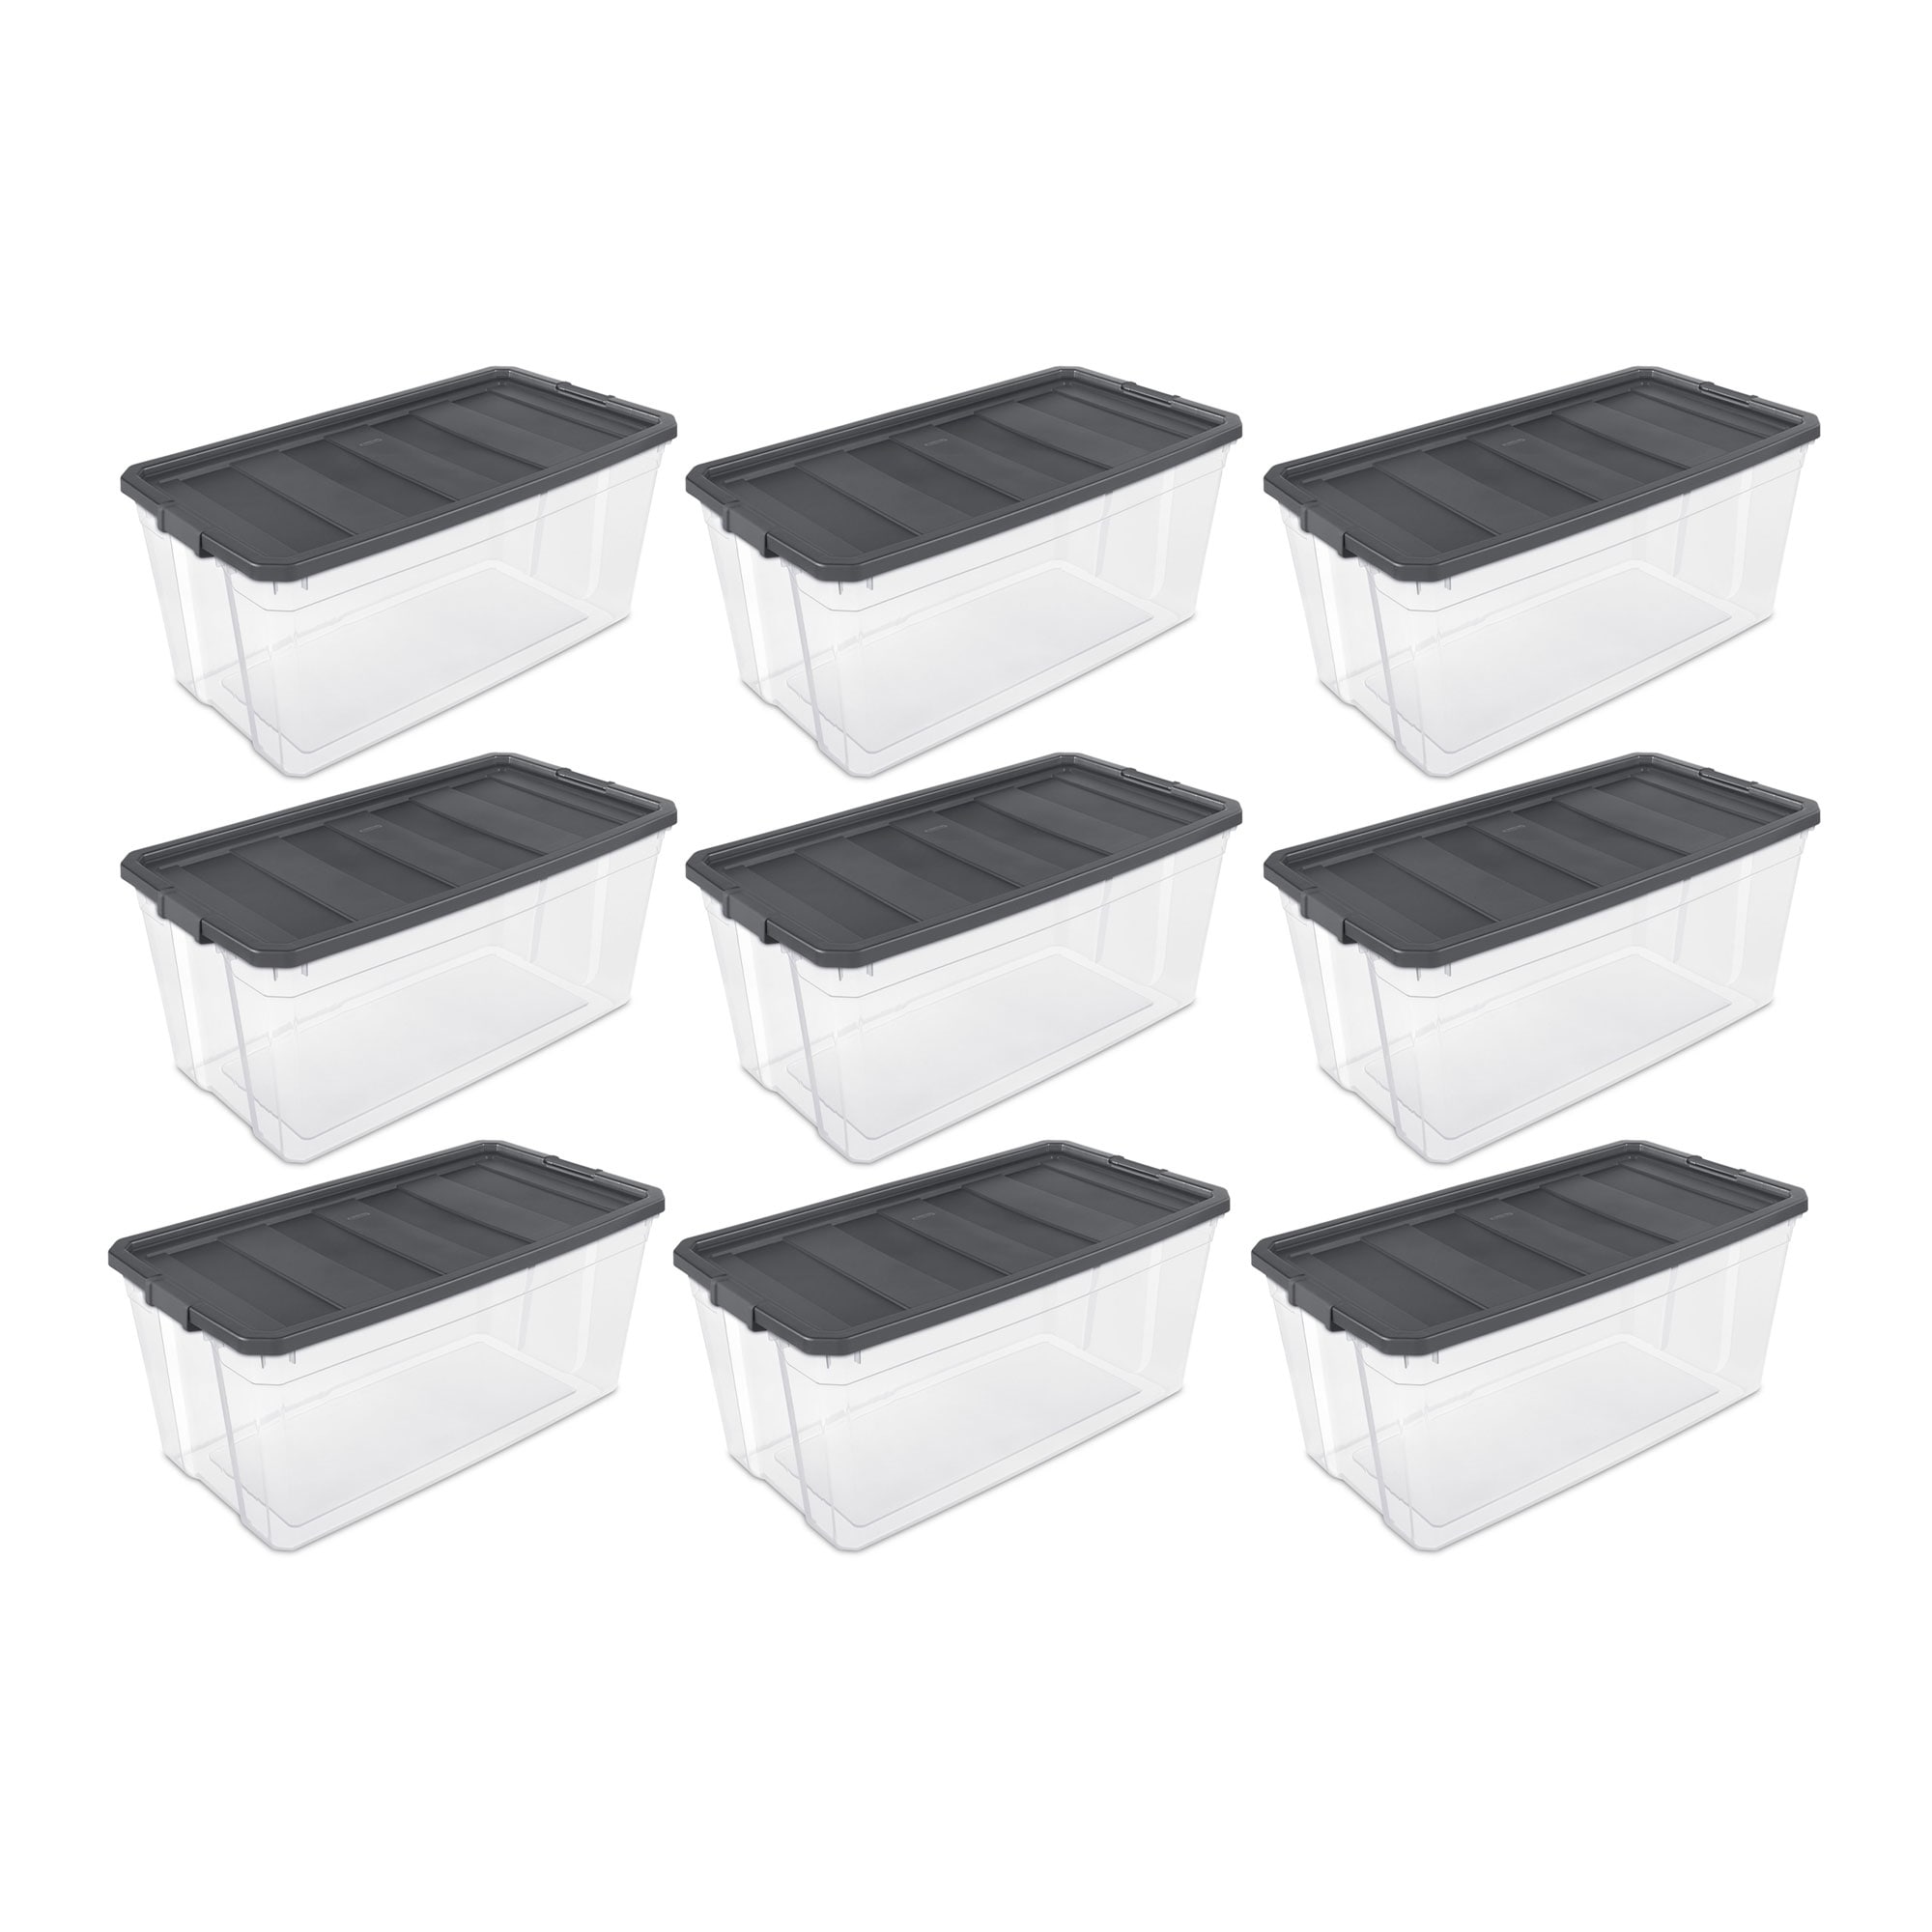 Sterilite 30 Gal Latching Tuff1 Storage Tote, Stackable Bin with Latch Lid,  Plastic Container to Organize Garage, Basement, Gray Base and Lid, 4-Pack